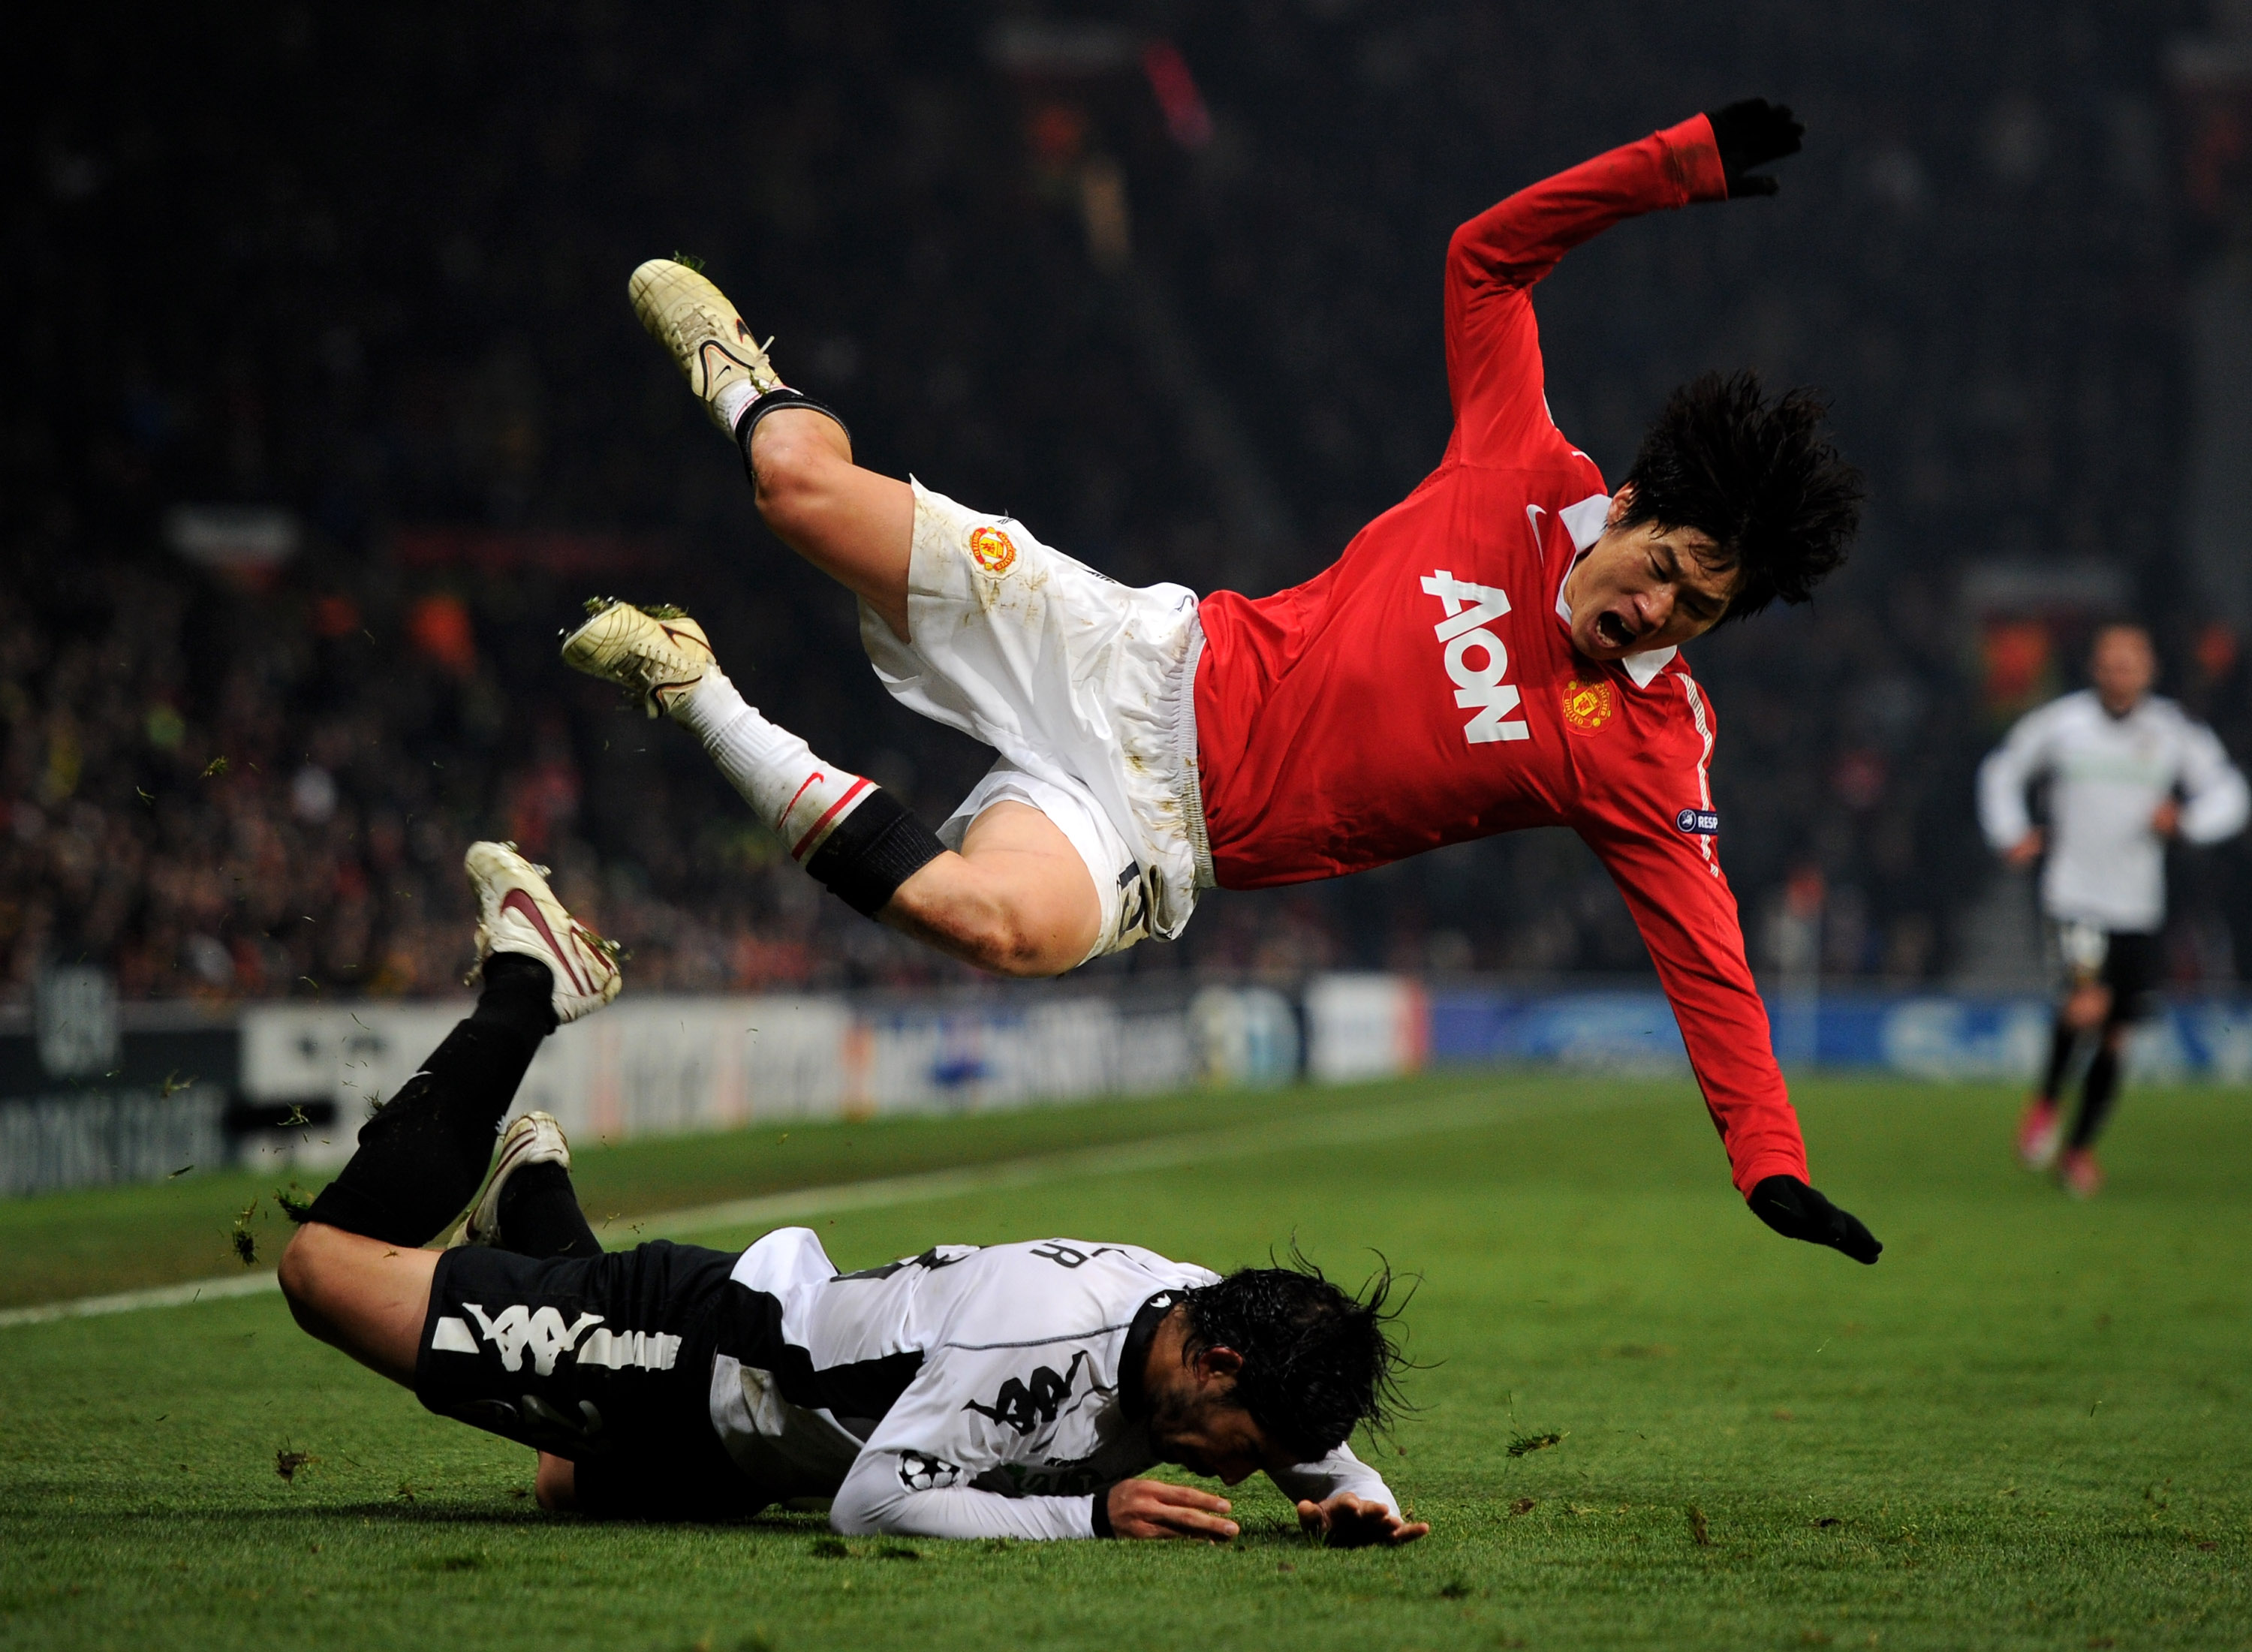 MANCHESTER, ENGLAND - DECEMBER 07:  Ever Banega of Valencia brings down Ji-Sung Park of Manchester United during the UEFA Champions League Group C match between Manchester United and Valencia at Old Trafford on December 7, 2010 in Manchester, England.  (P